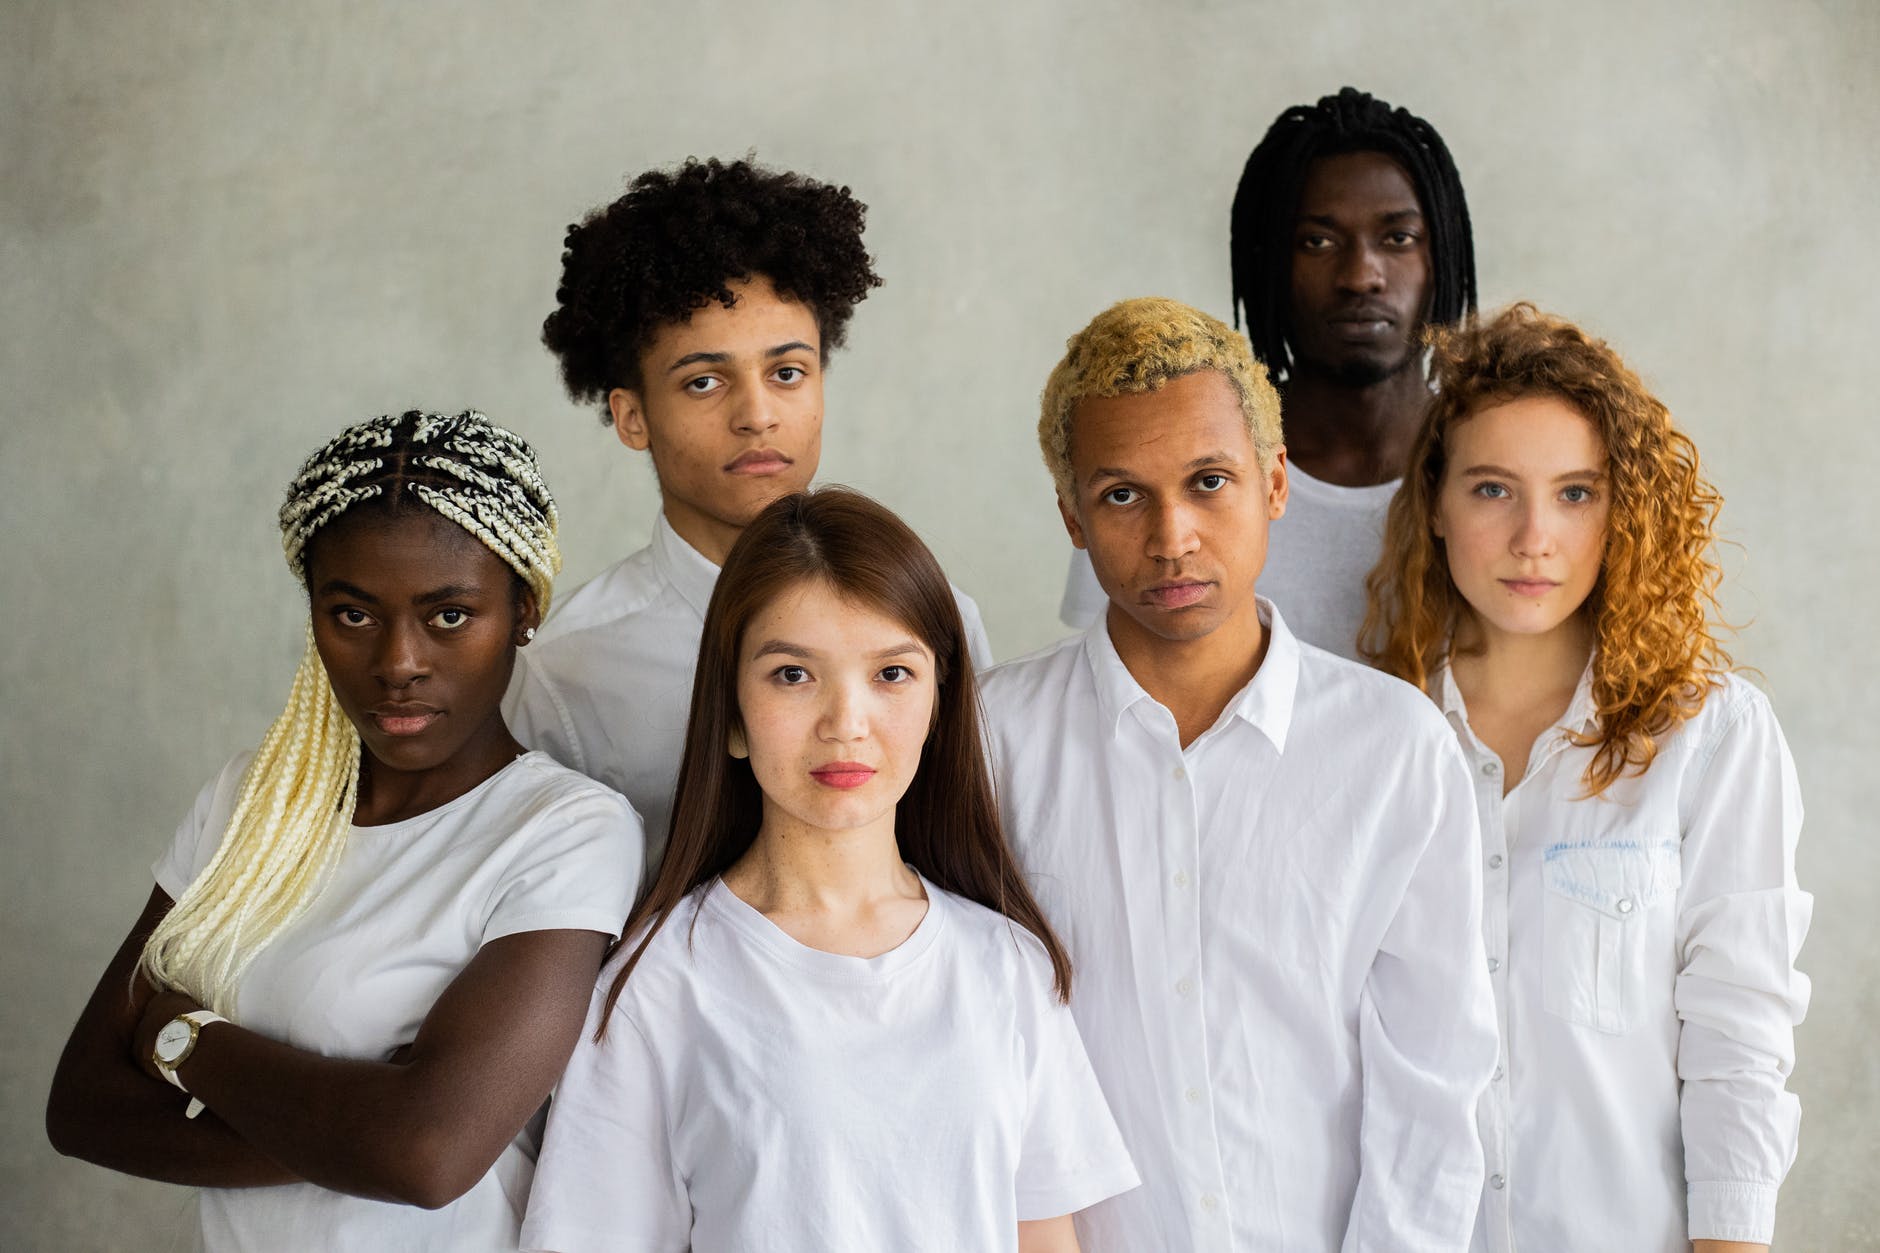 group of diverse young people with different appearances